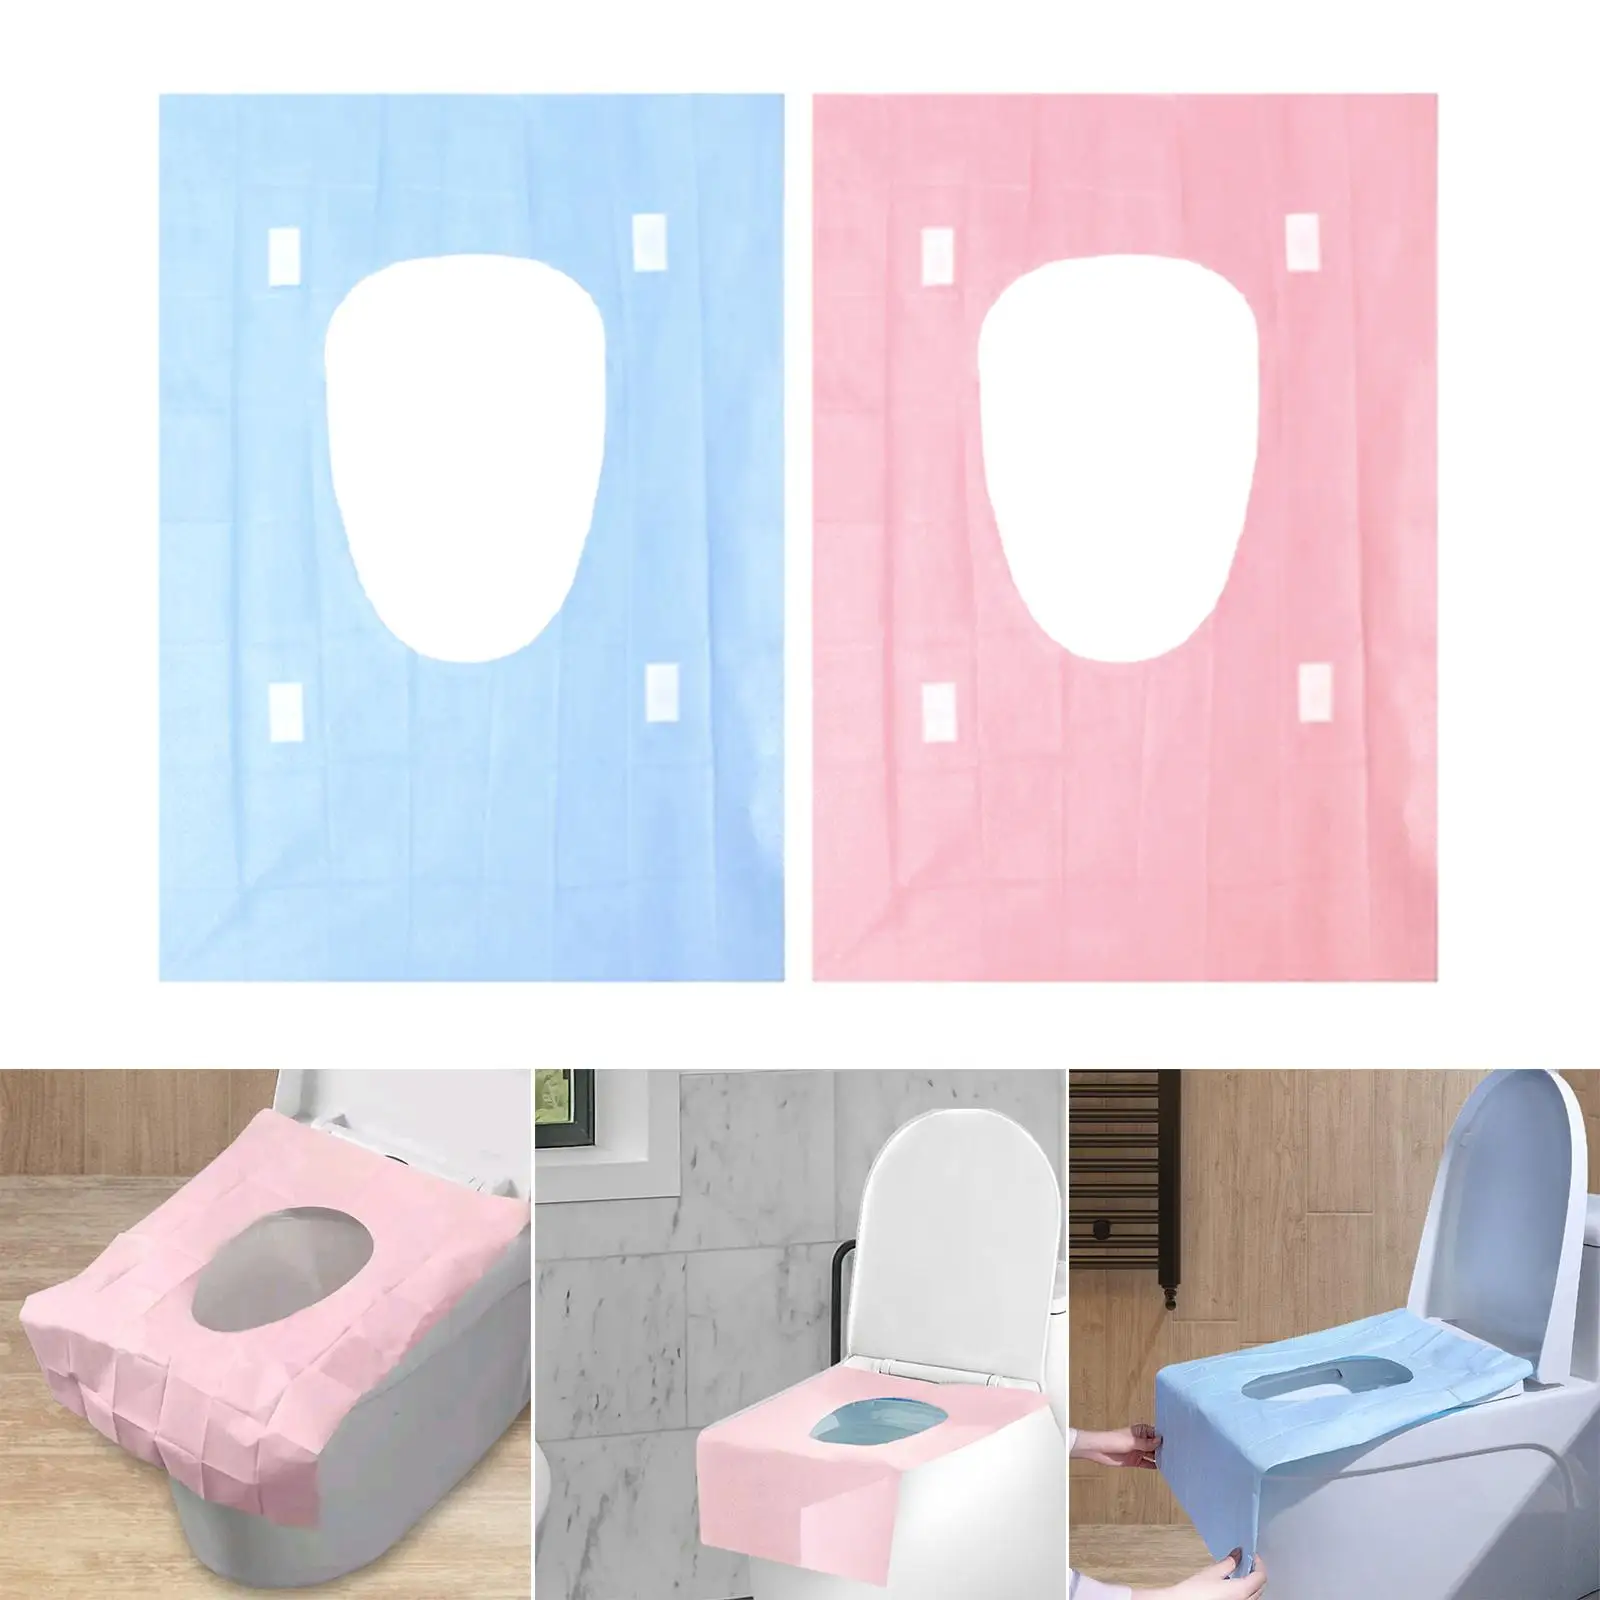 20Pcs Individually Wrapped Disposable Toilet Seat Cover Firmly Fixed Waterproof for Public Restrooms Stations Camping Hotels